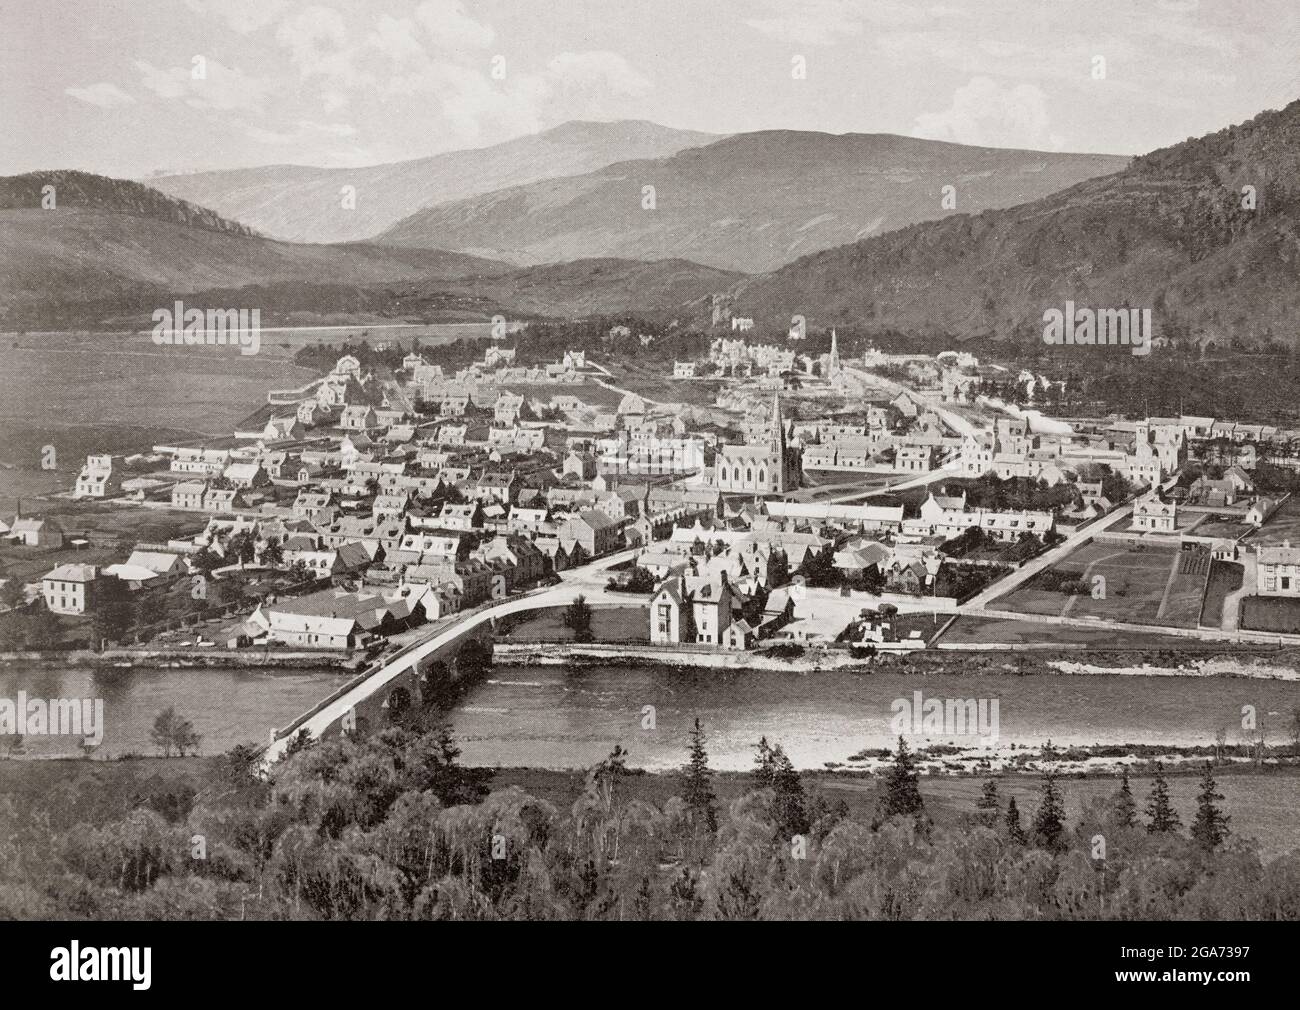 A late 19th century view of Ballater, a burgh on the River Dee, immediately east of the Cairngorm Mountains in Aberdeenshire, Scotland.  In the early 14th century, the area was part of the estates of the Knights of St John, but the settlement did not develop until around 1770; first as a spa resort to accommodate visitors to the Pannanich Mineral Well, then later upon the arrival of the railway in 1866 it was visited by many tourists taking advantage of the easier access thus afforded. Stock Photo